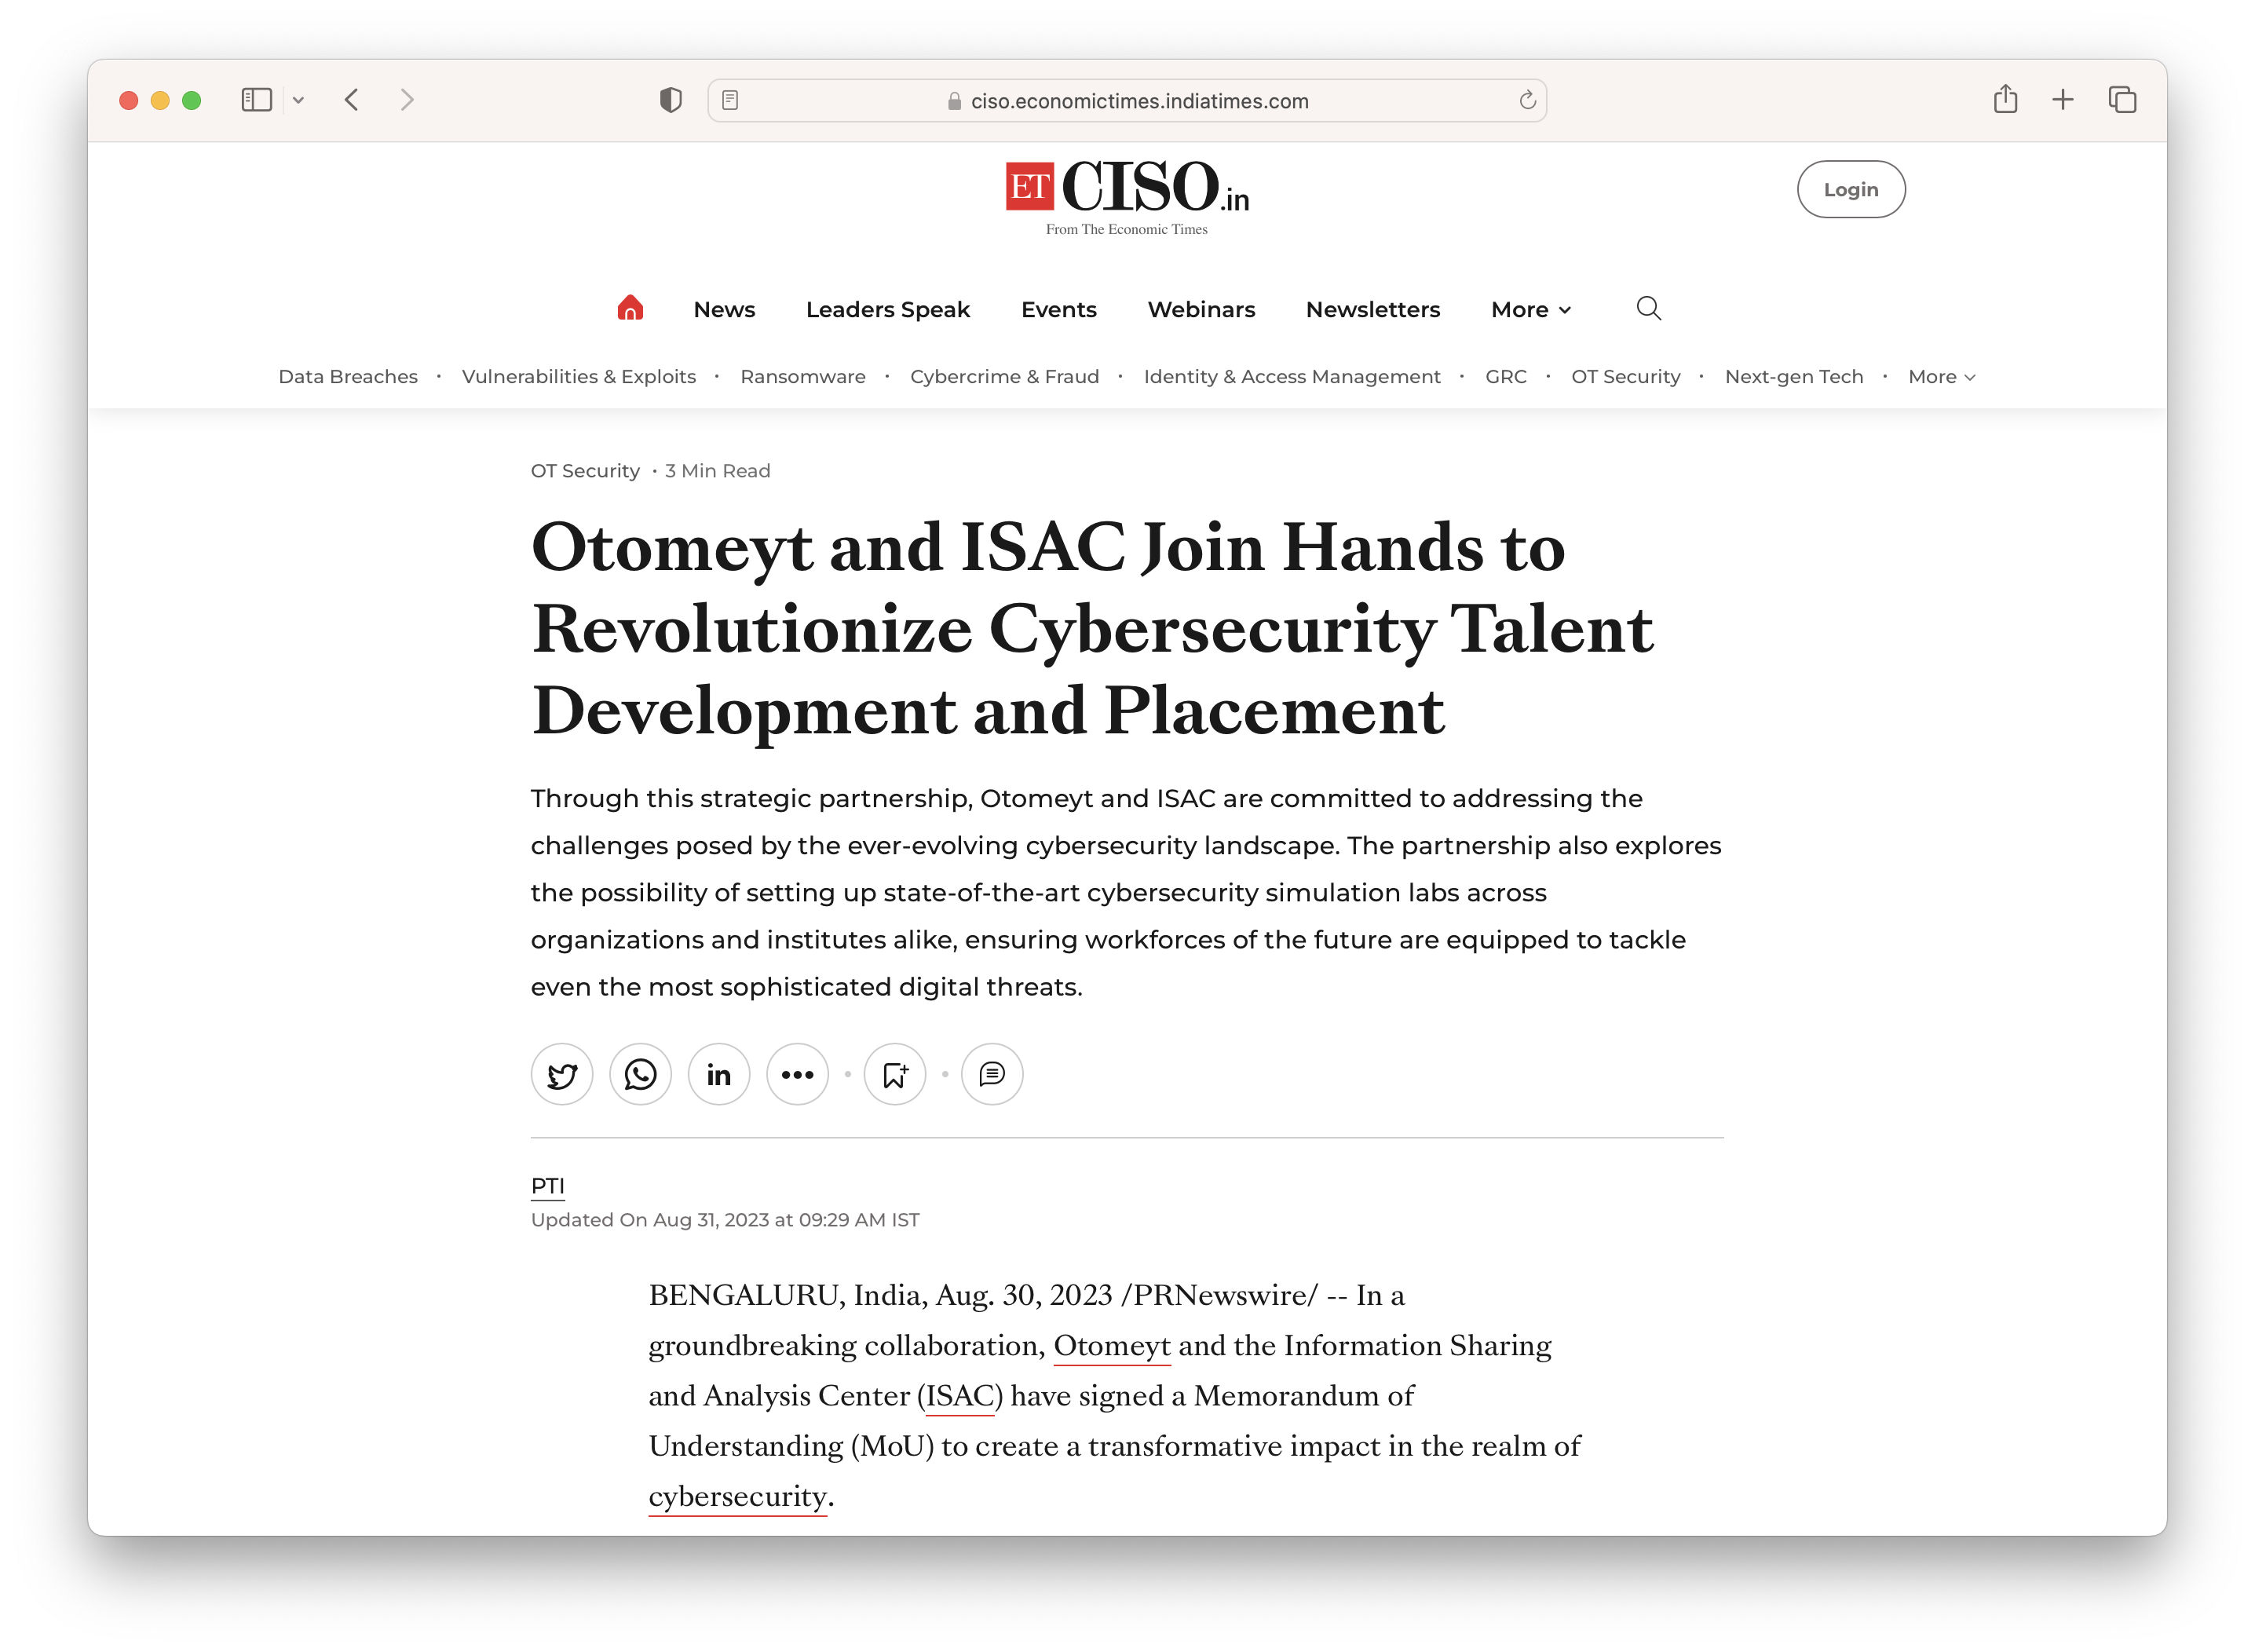 Otomeyt and ISAC Join Hands to Revolutionize Cybersecurity Talent Development and Placement